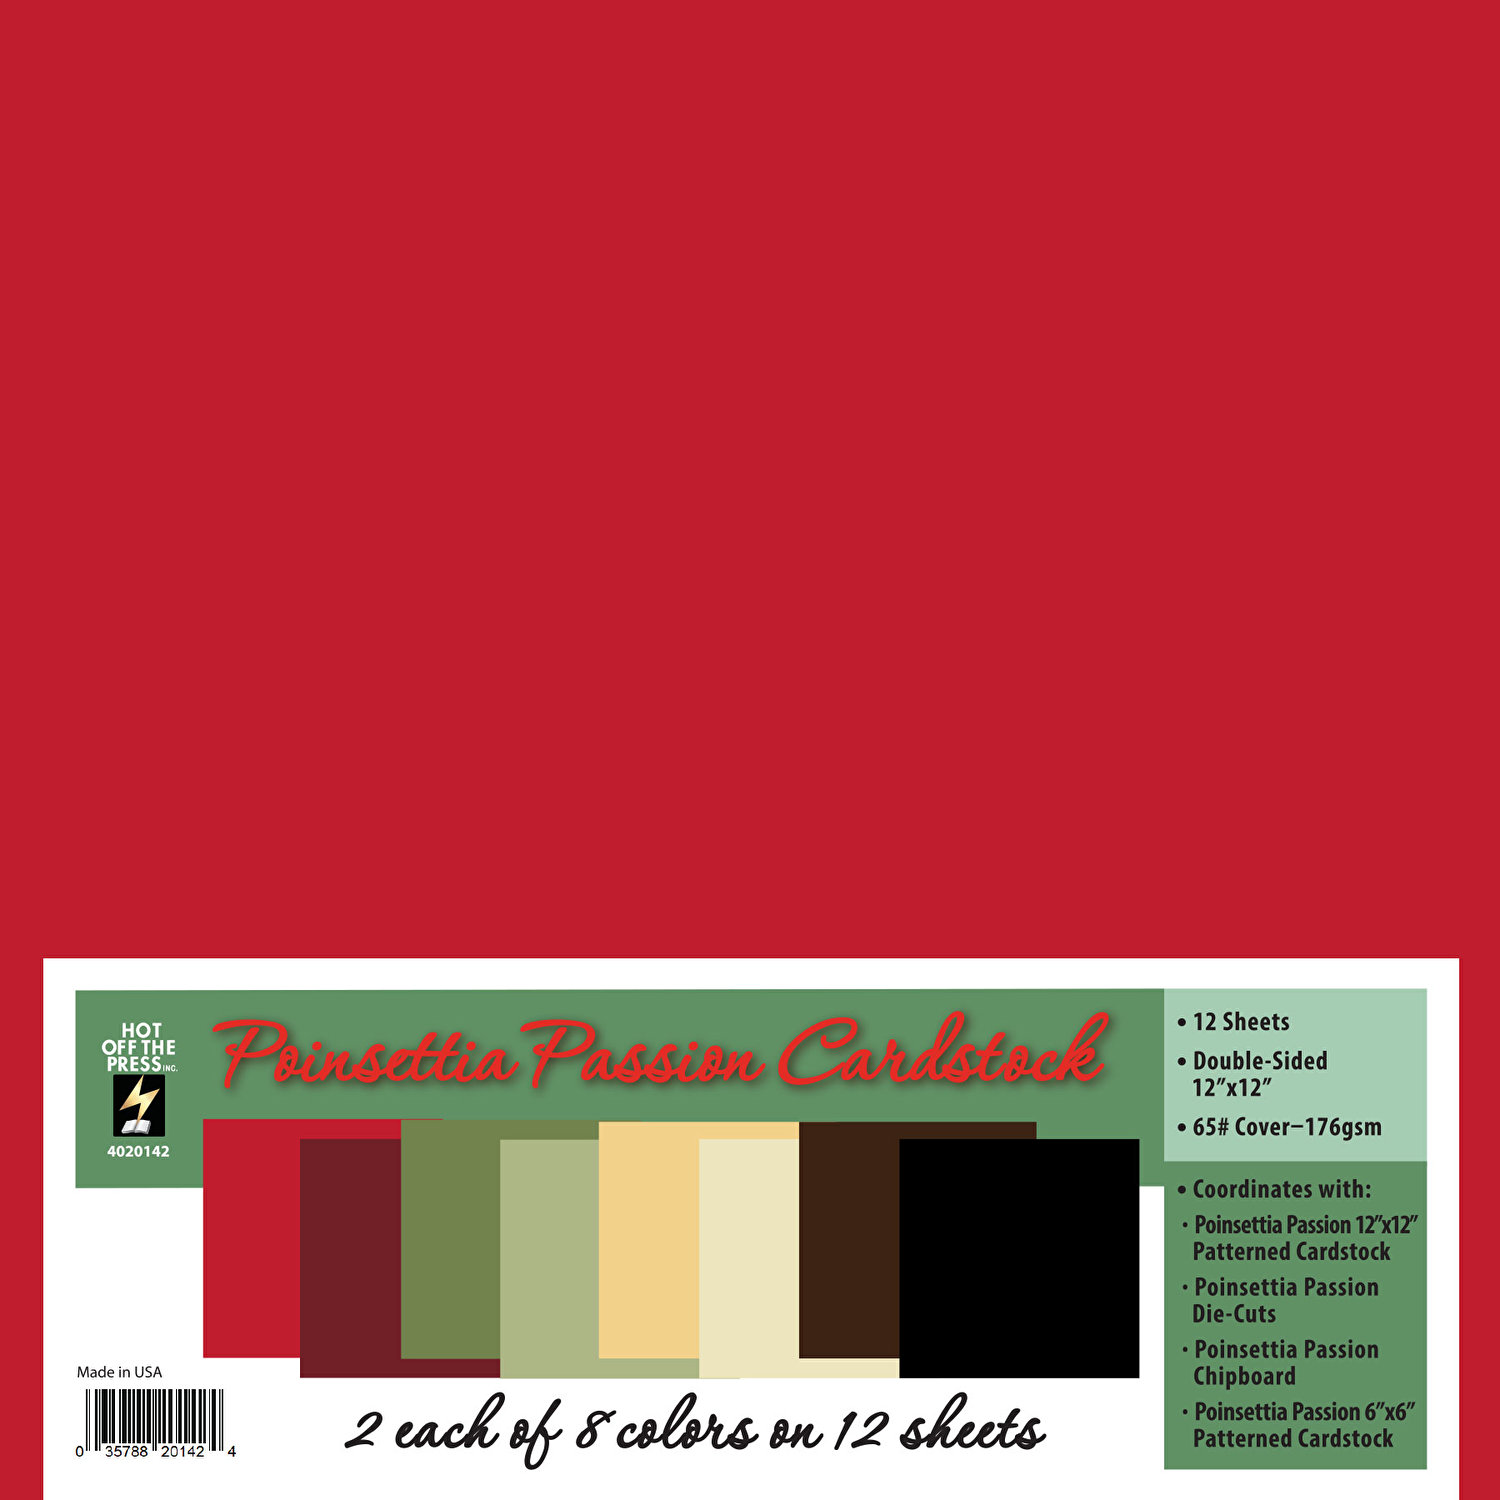 Poinsettia Passion 12x12 Solid Cardstock